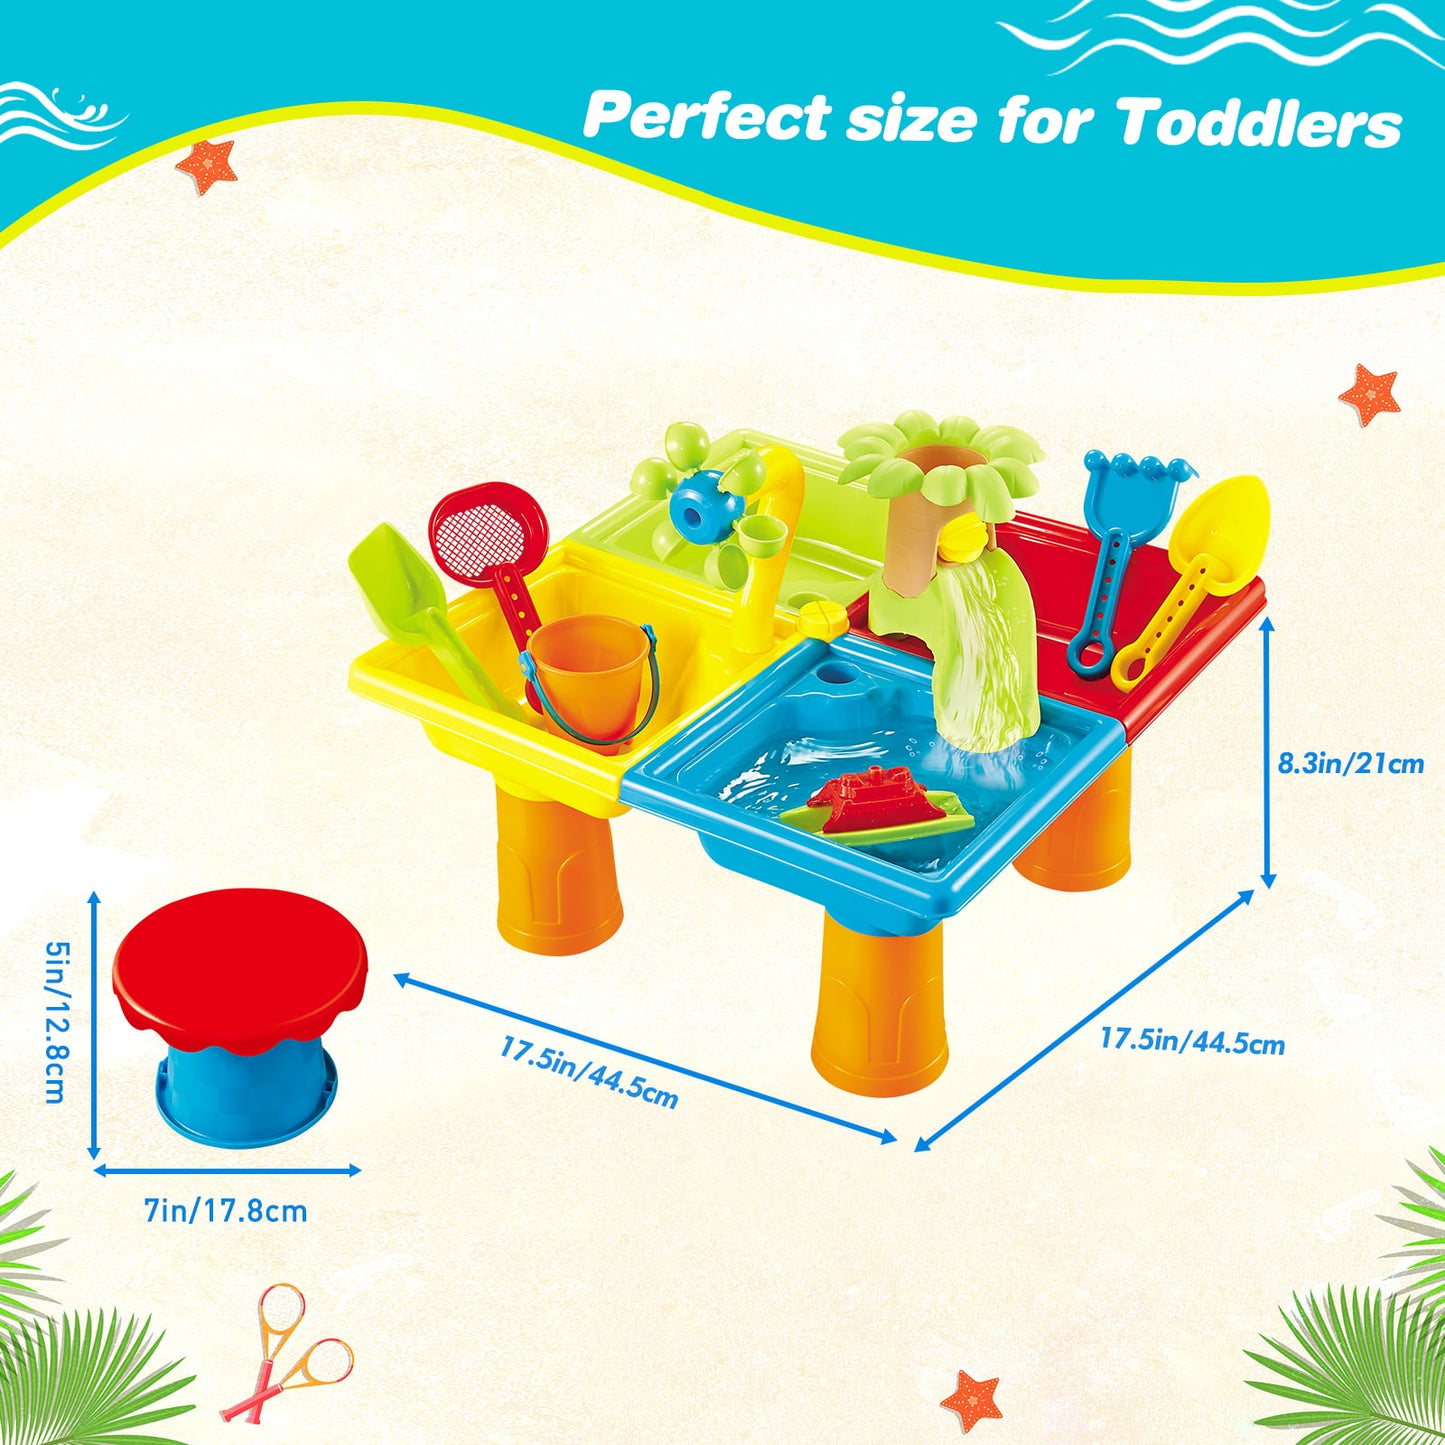 4-in-1 Sand Water Table for Toddlers, Beach Summer Toys Outdoor Games for Boys Girls Aged 1 2 3+